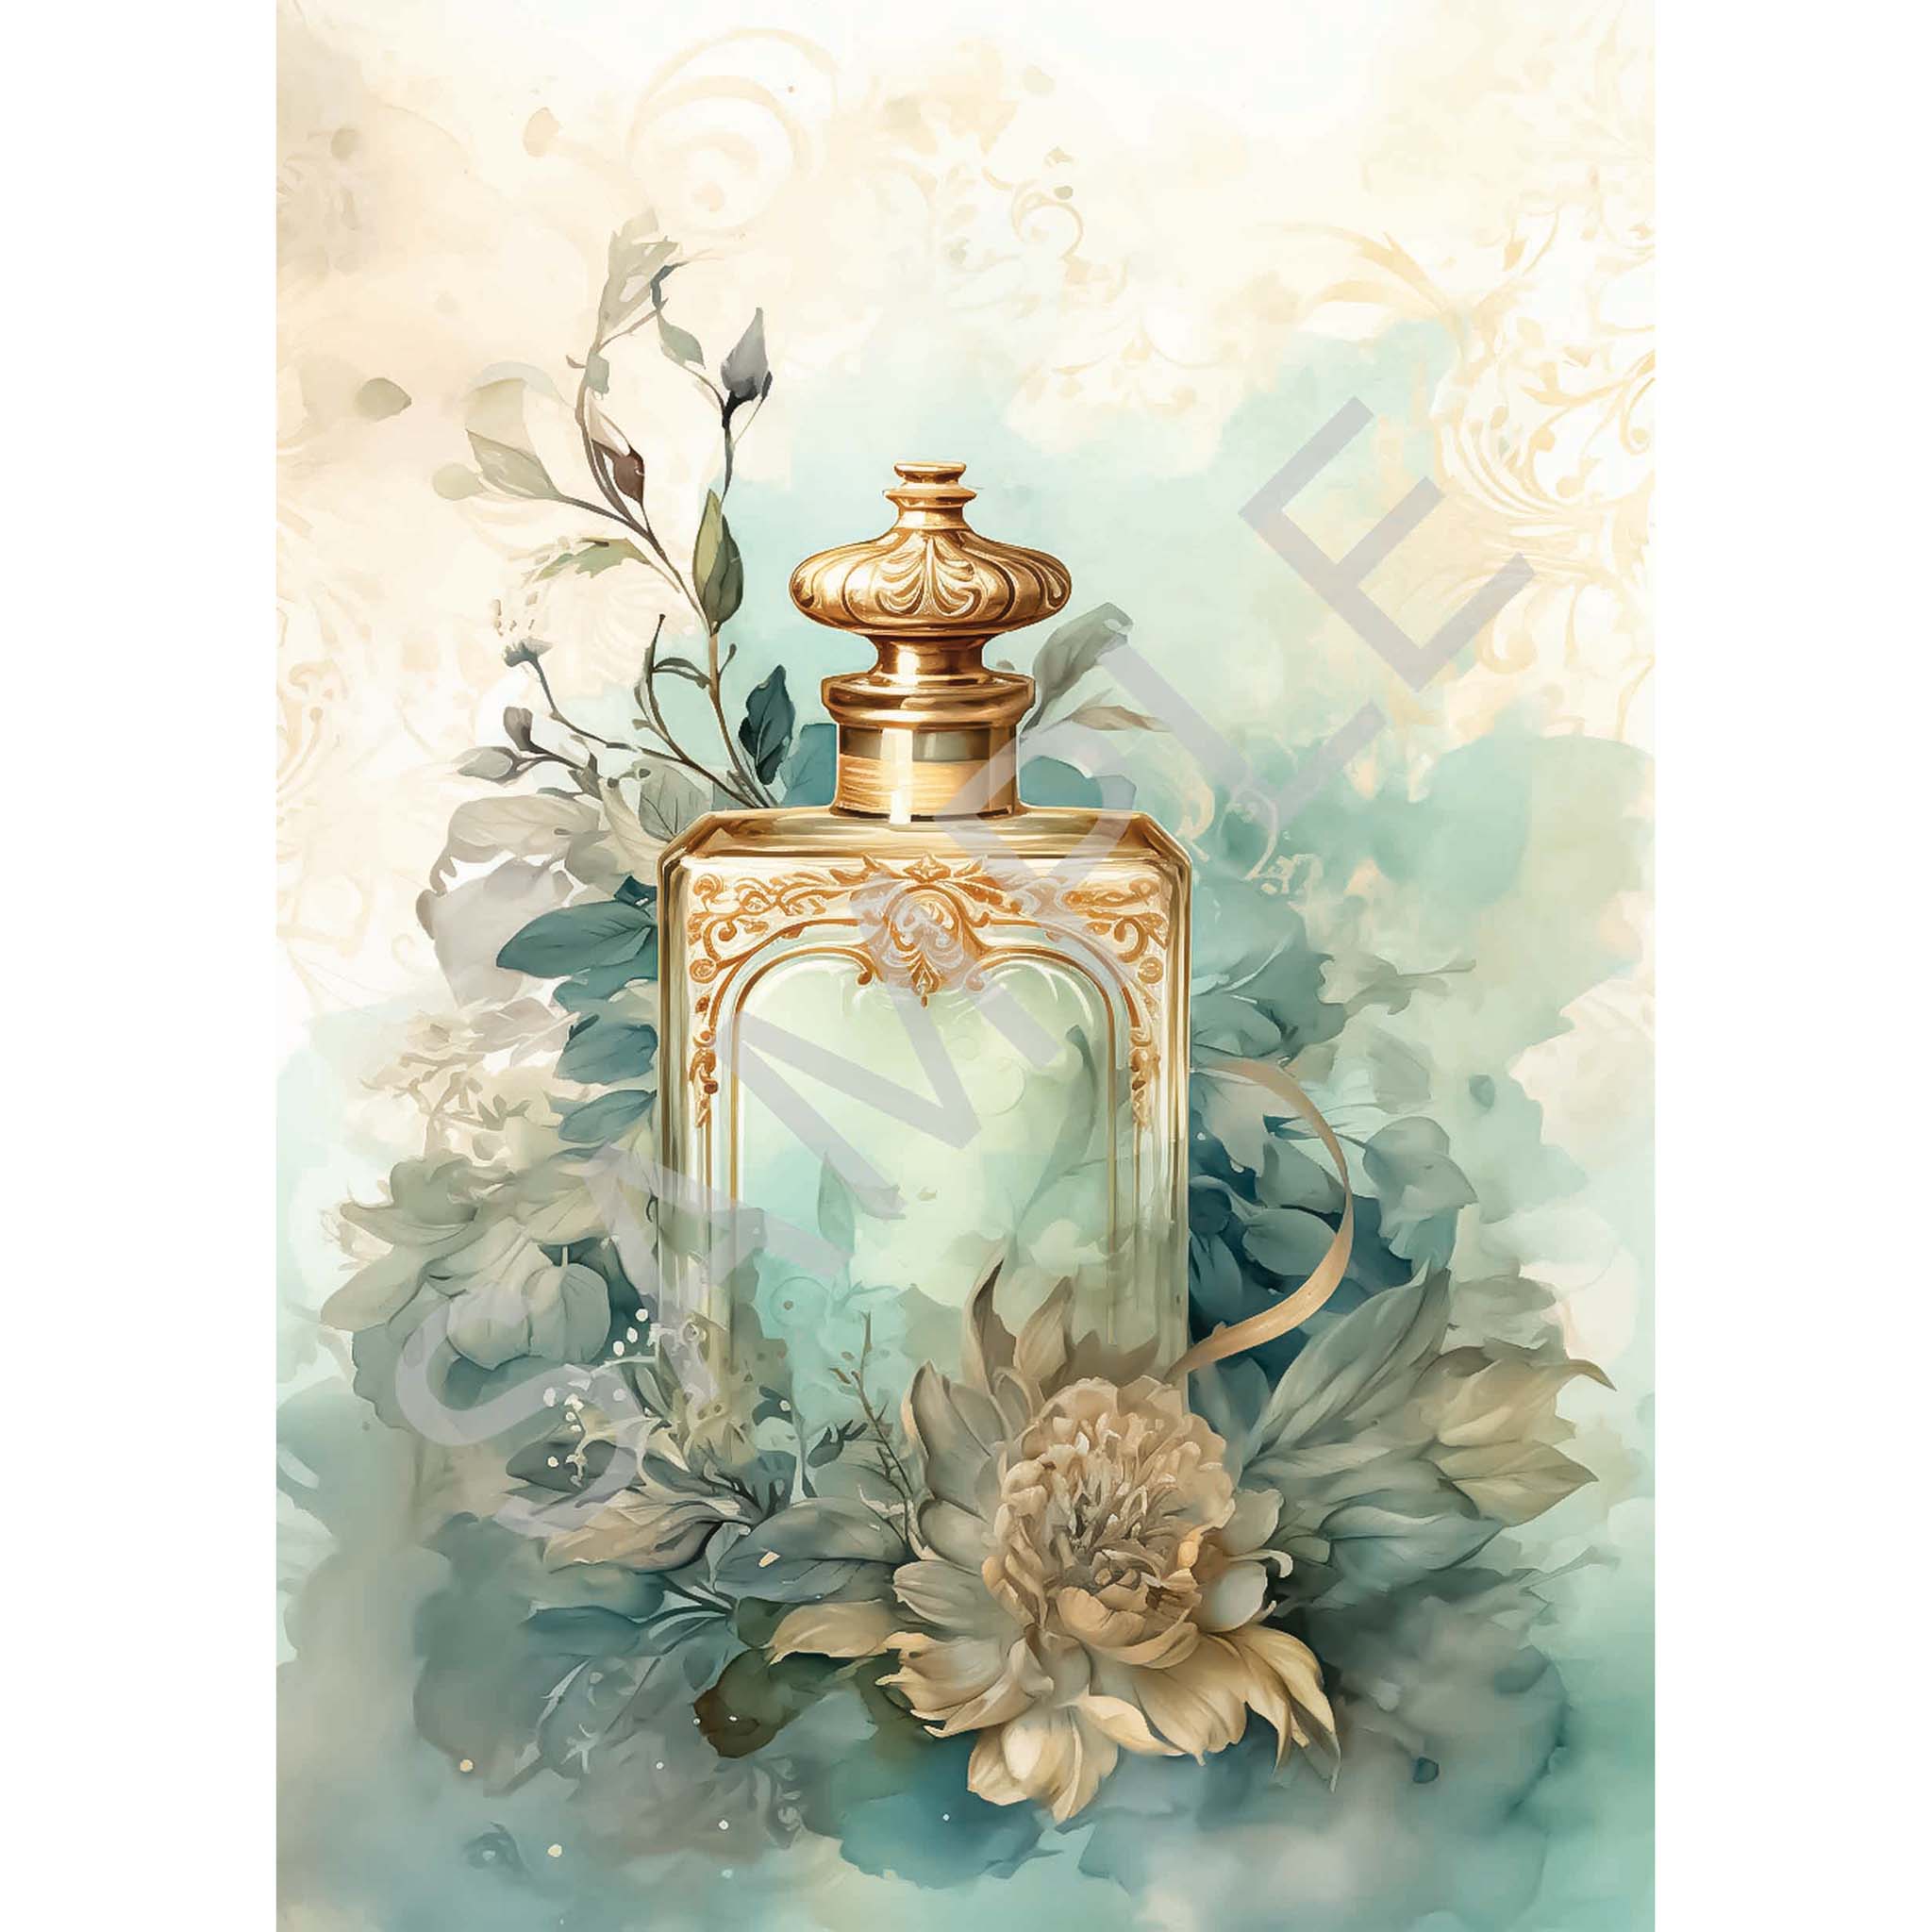 A4 rice paper that features a vintage perfume bottle nestled among beautiful flowers on a dreamy background with hints of gold. White borders are on the sides.